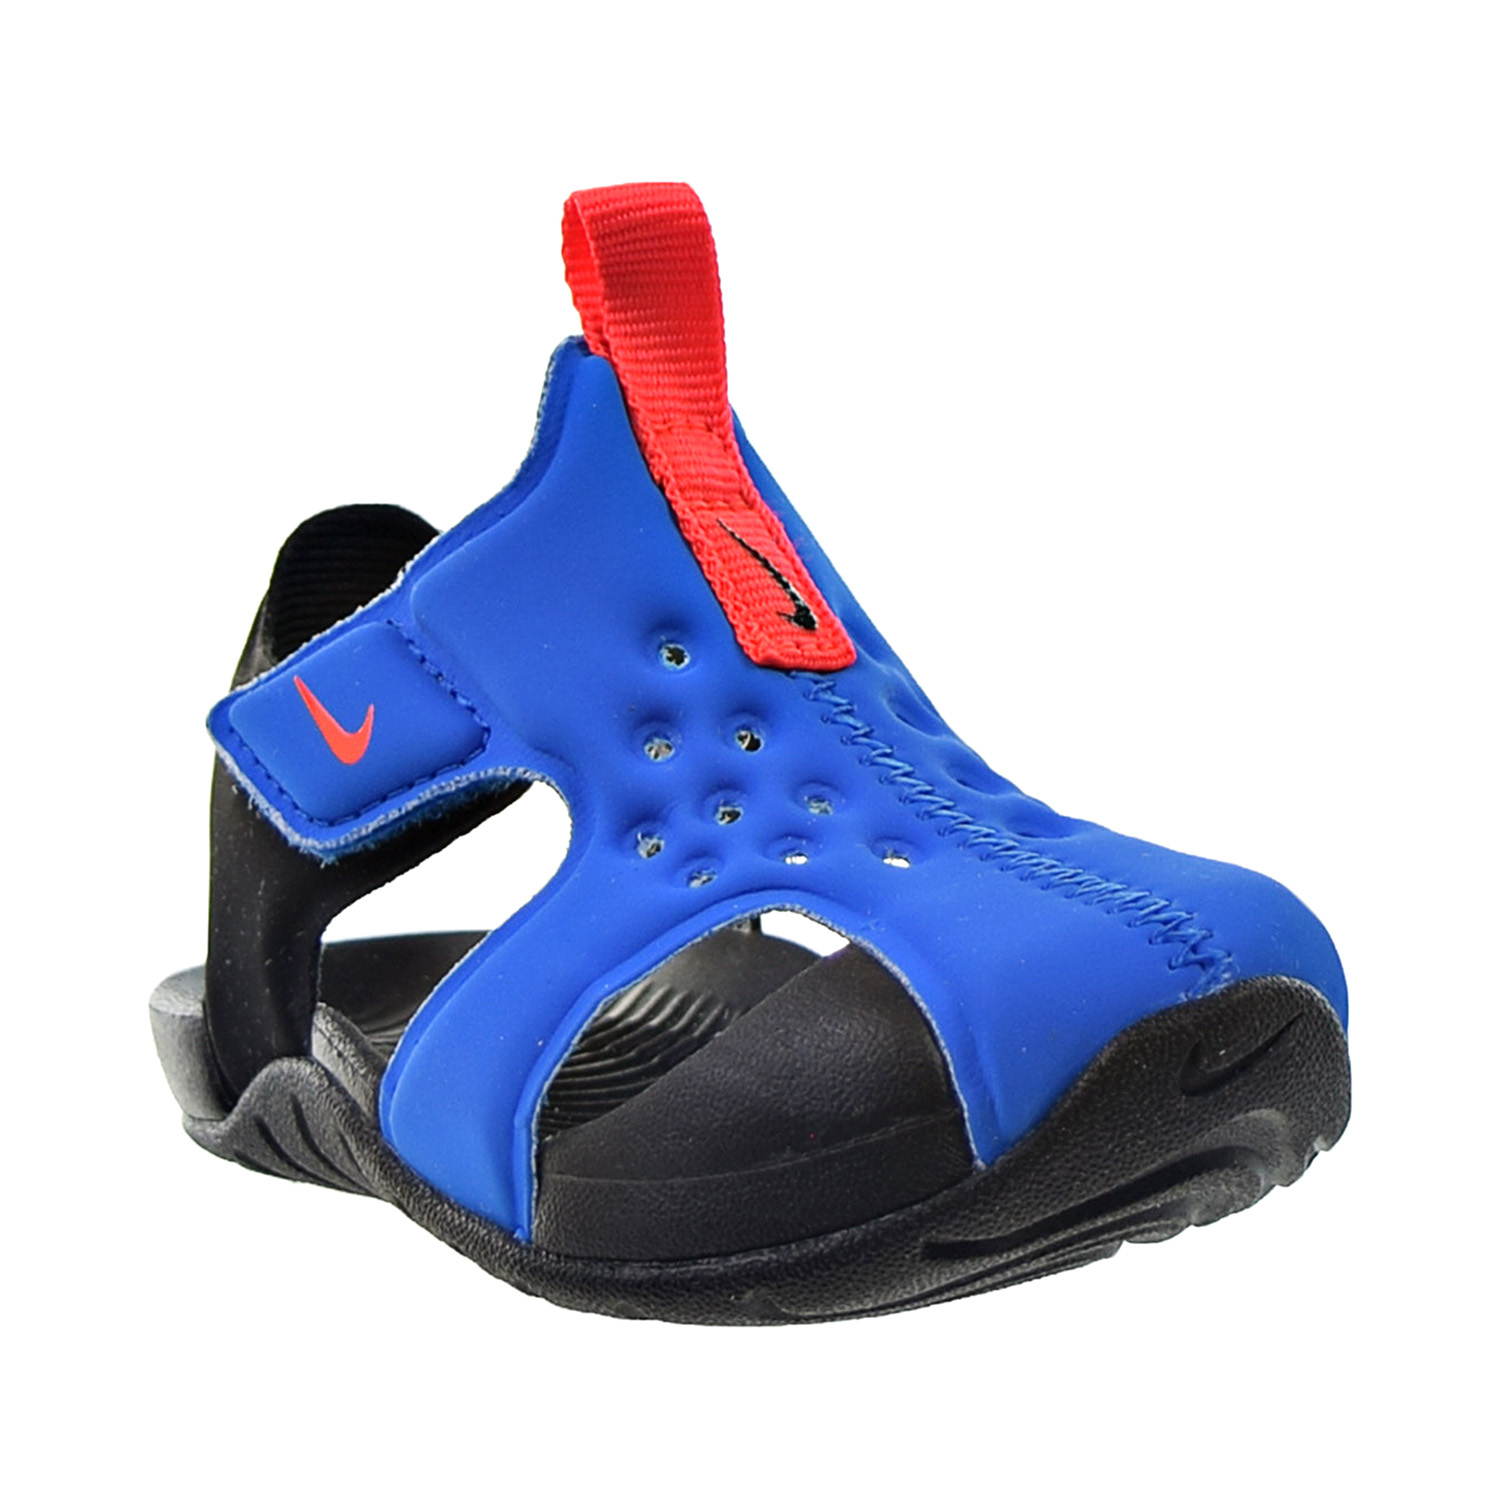 Nike Sunray Protect 2 (TD) Toddlers' Sandals Photo Blue-Bright Crimson 943827-400 - image 2 of 6